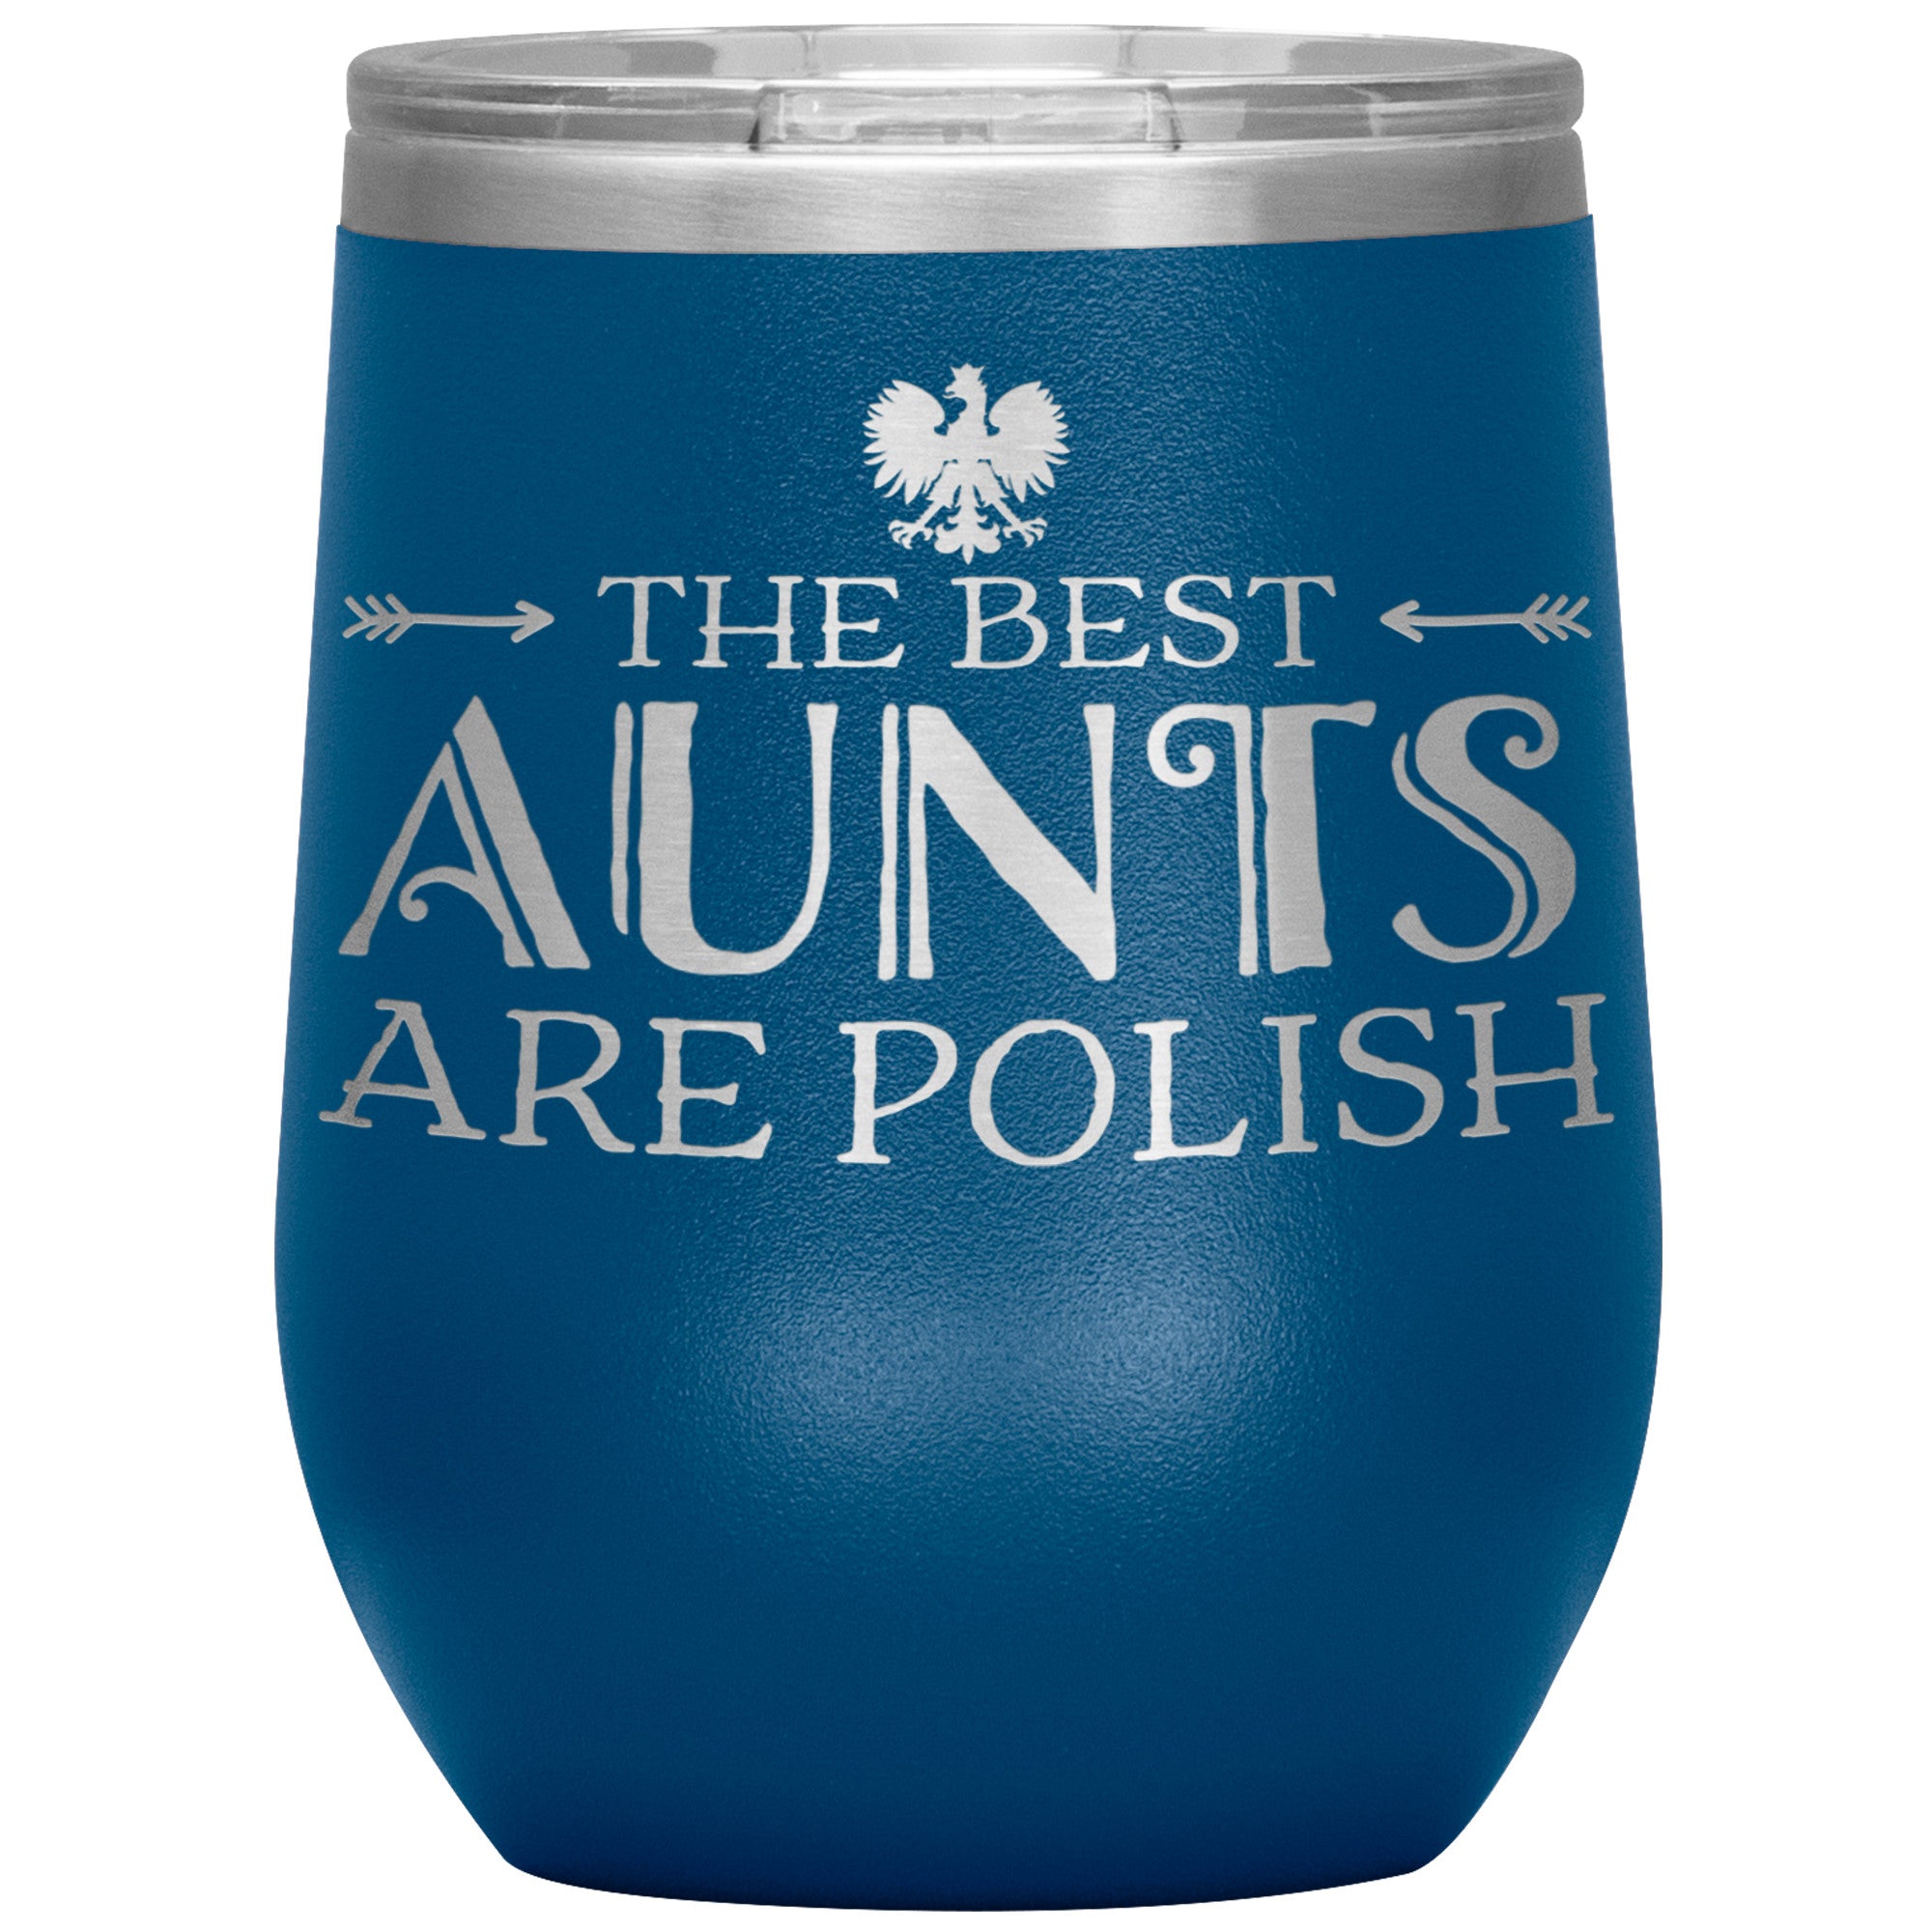 The Best Aunts Are Polish Insulated Wine Tumbler Tumblers teelaunch Blue  